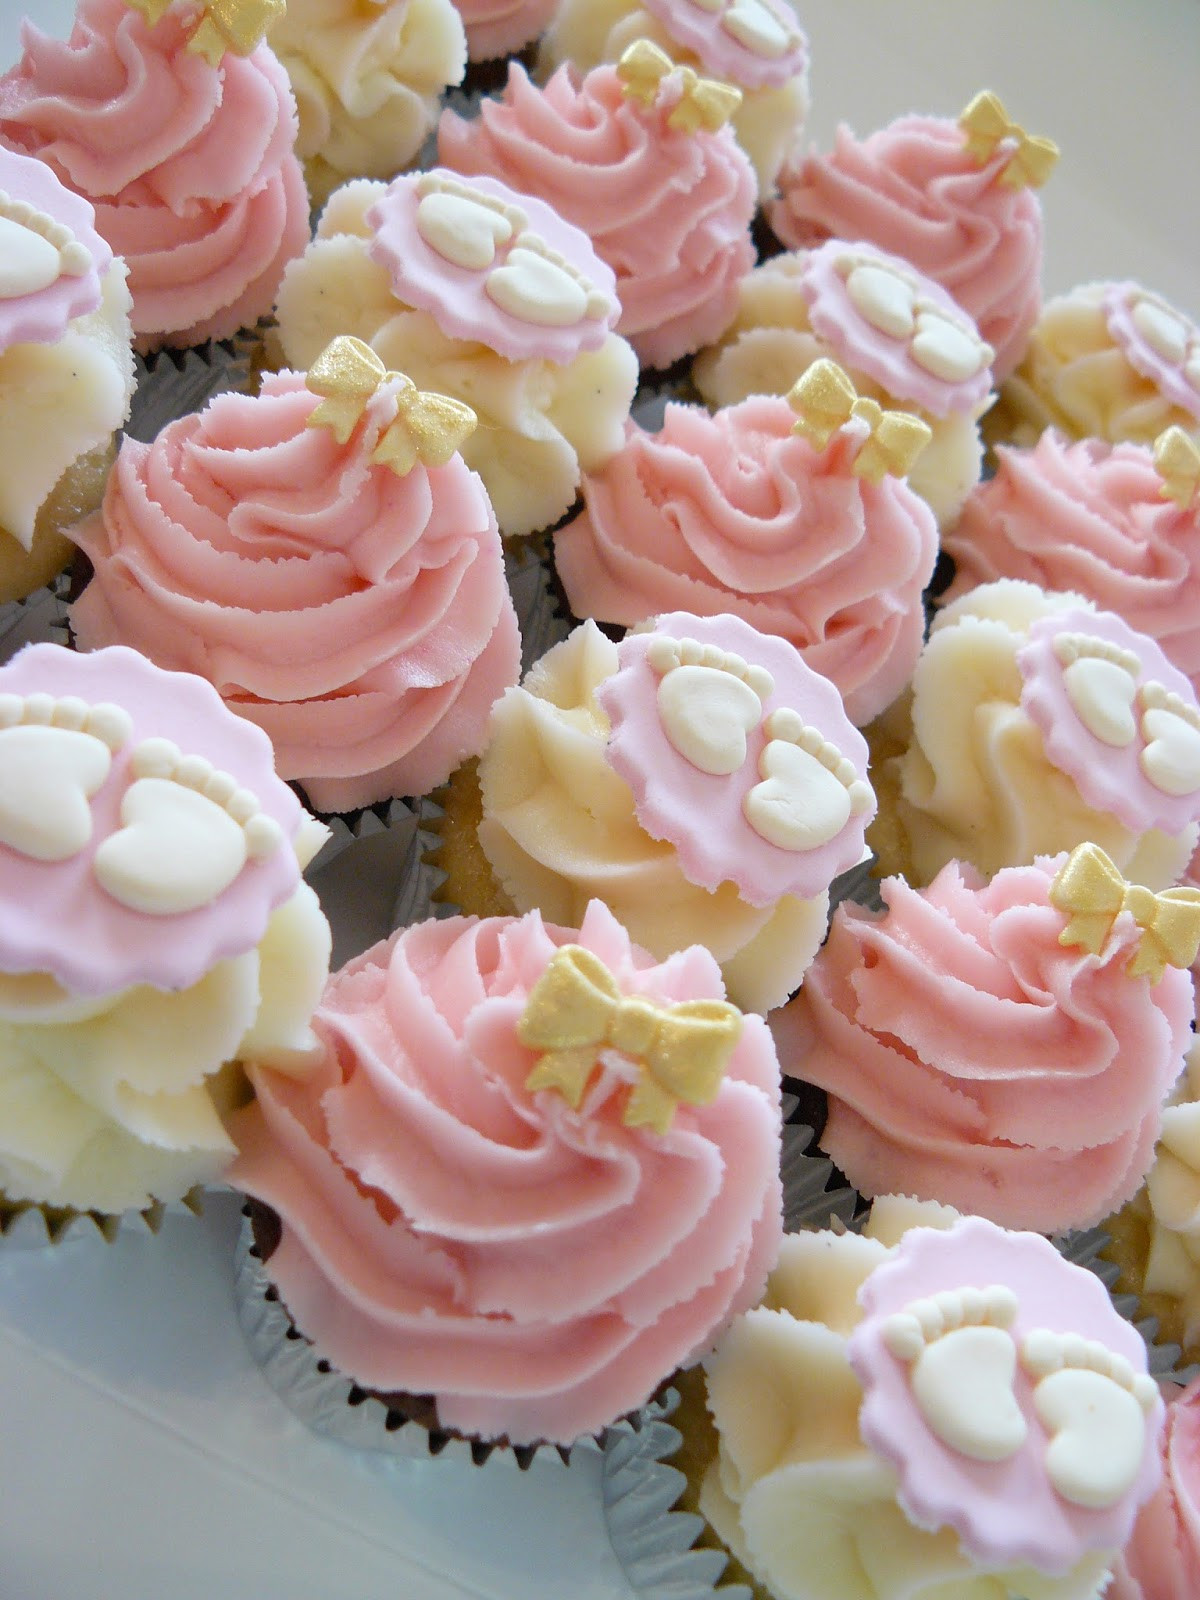 Pink Baby Shower Cupcakes
 The Cup Cake Taste Brisbane Cupcakes Pink & Gold Baby